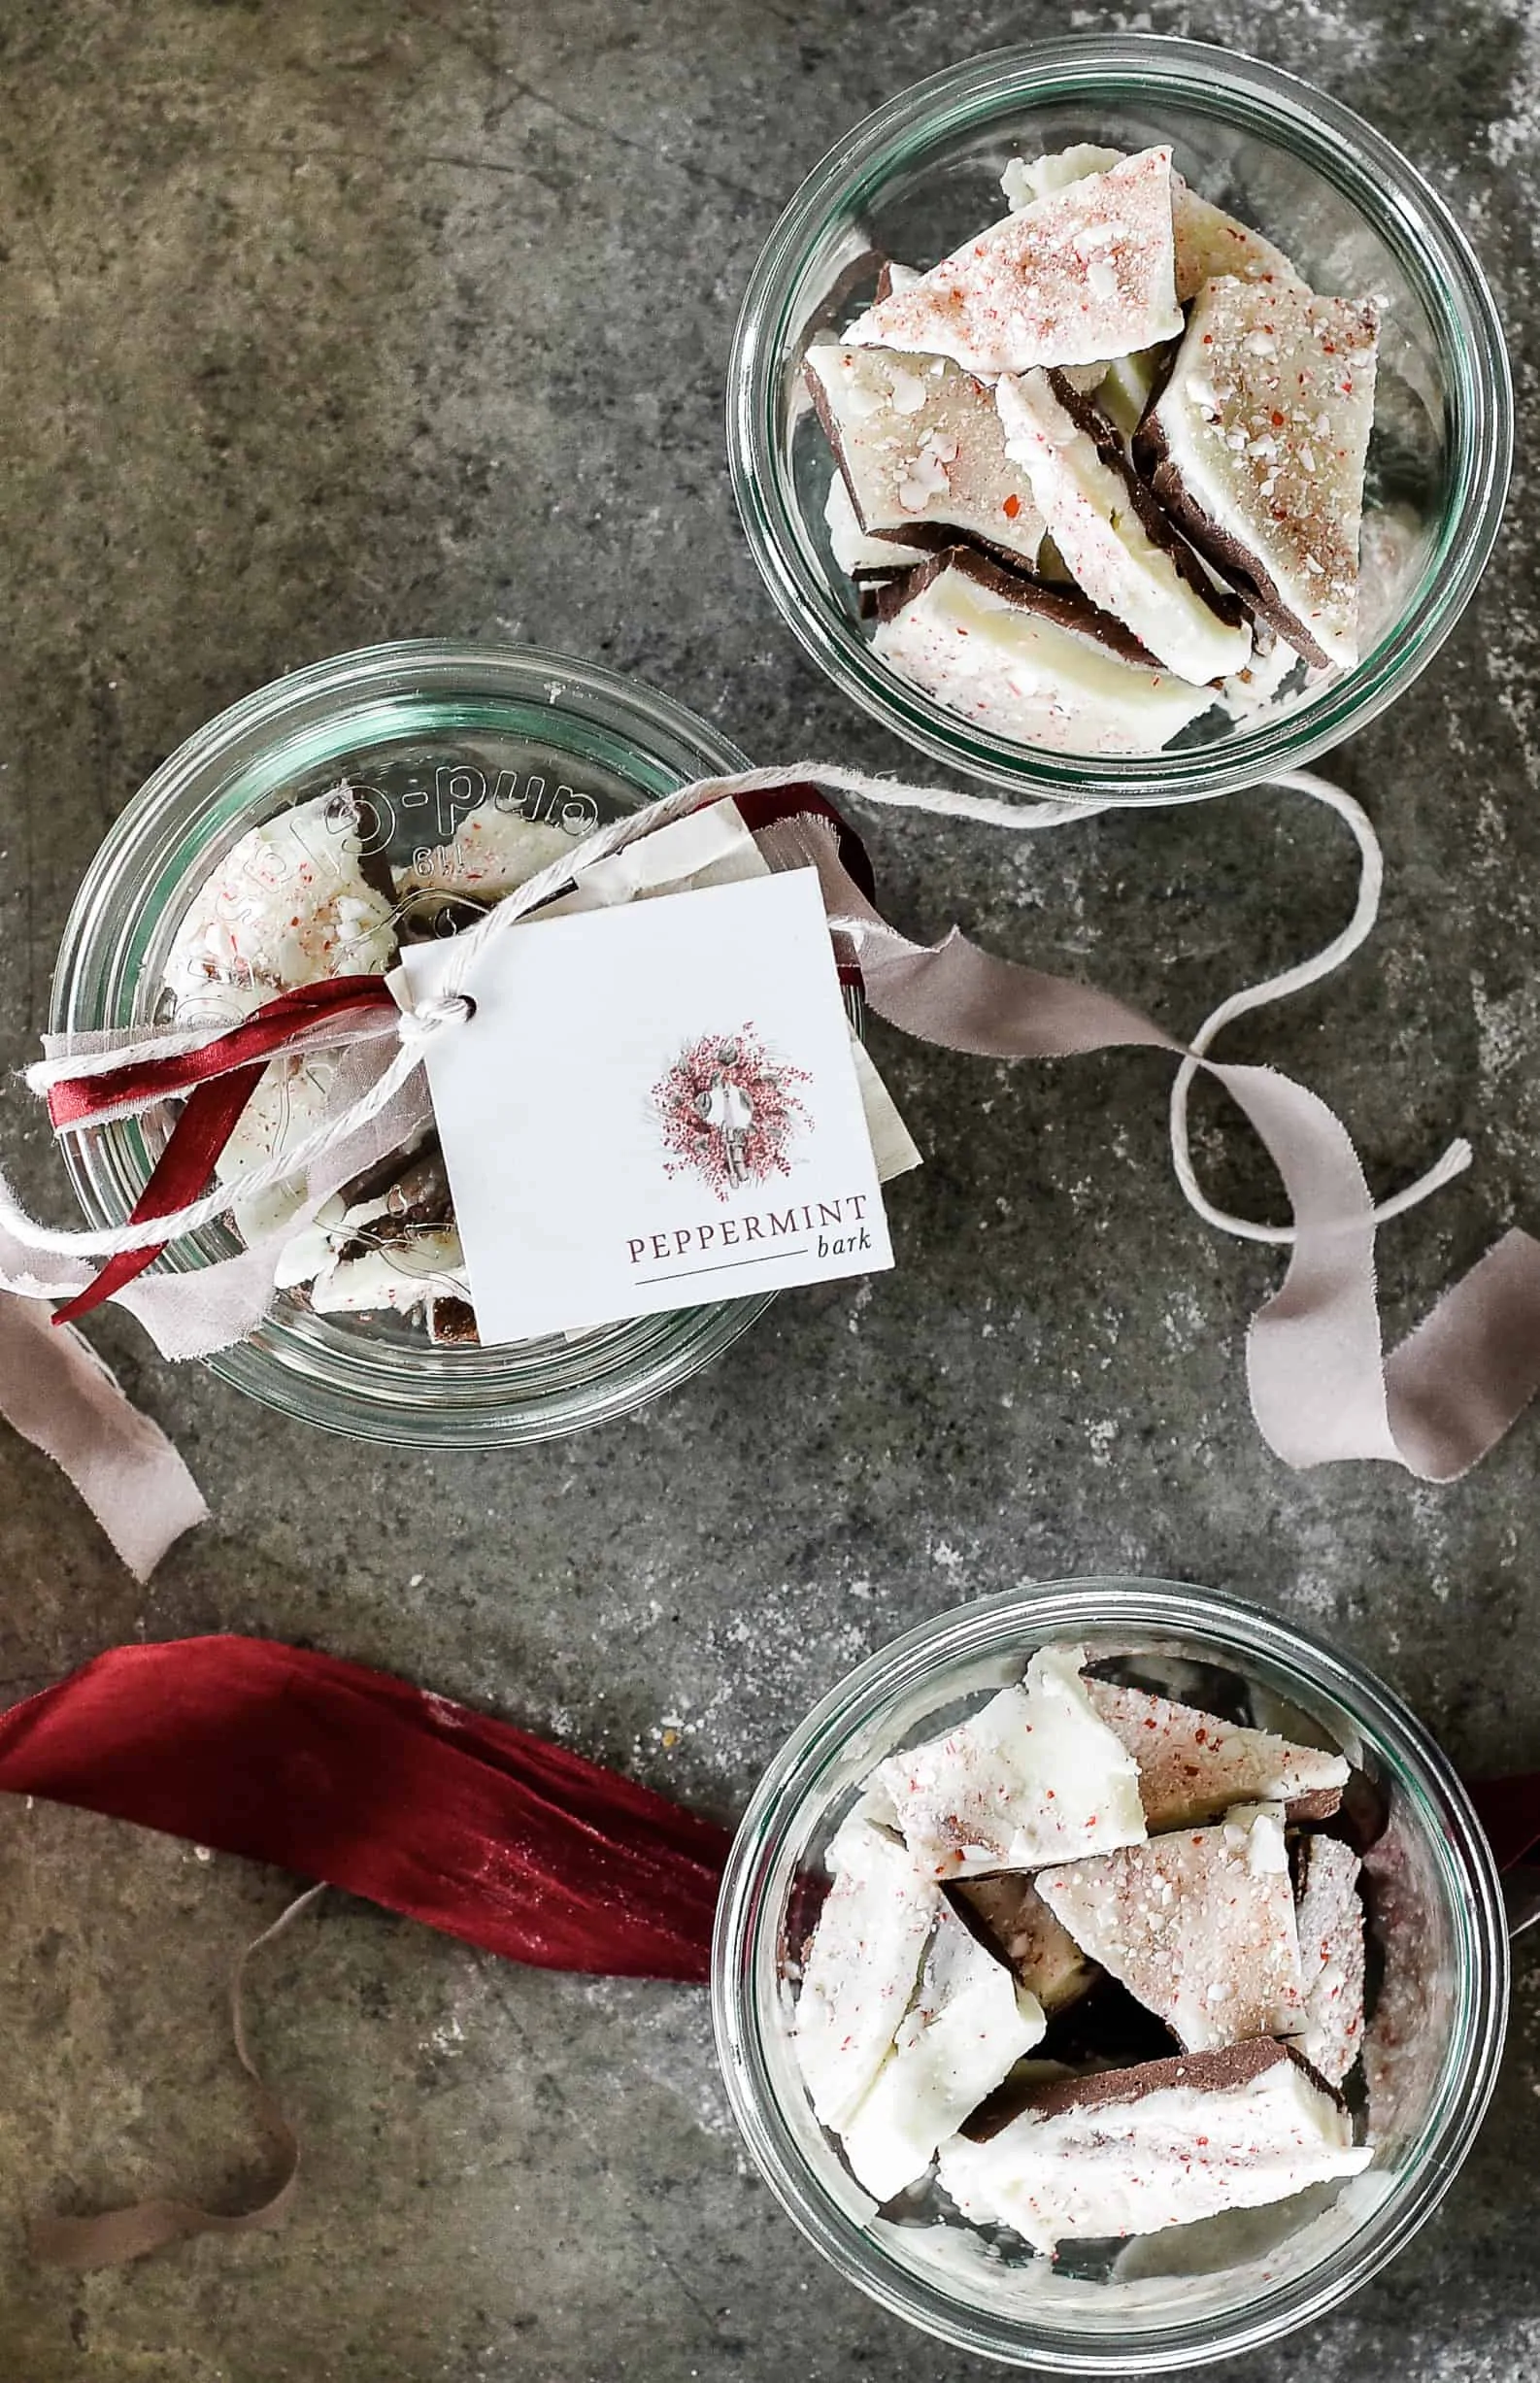 Make this homemade peppermint bark recipe as an easy handmade gift this holiday season! You won’t believe just how simple this homemade peppermint bark recipe is! 